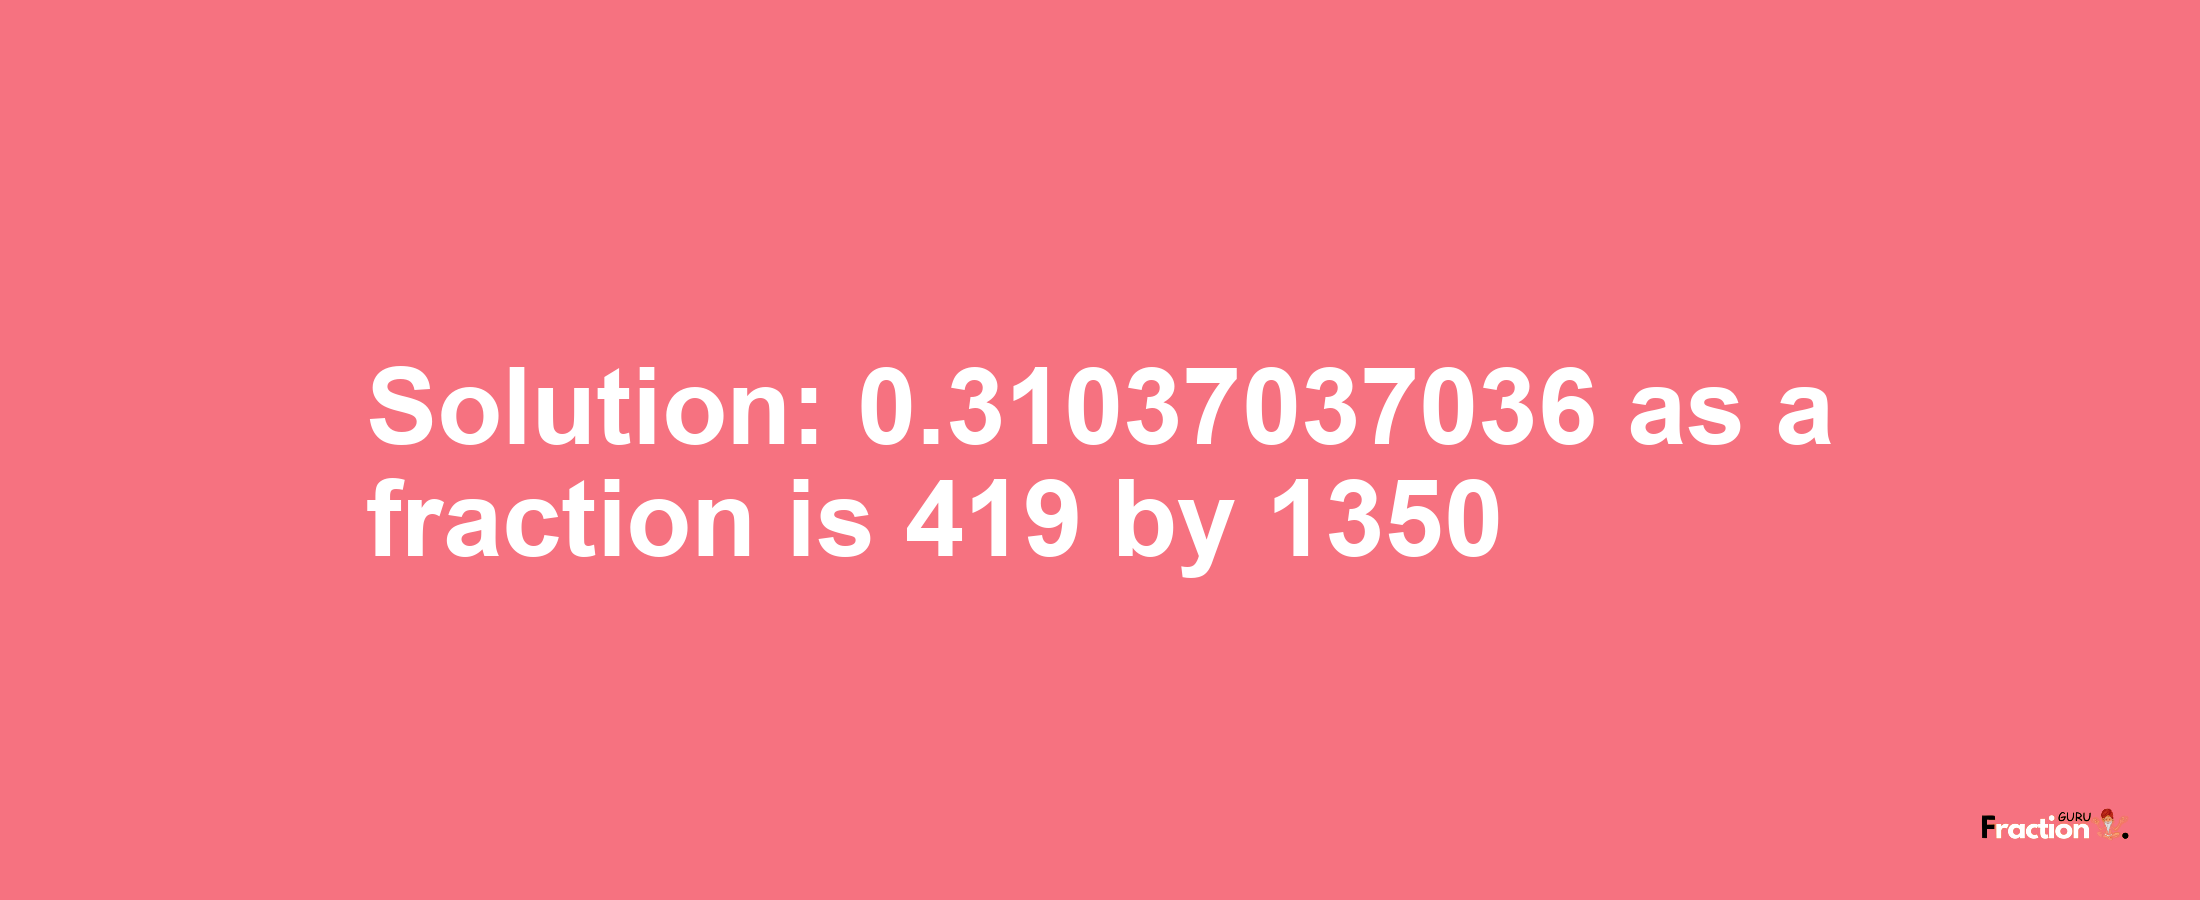 Solution:0.31037037036 as a fraction is 419/1350